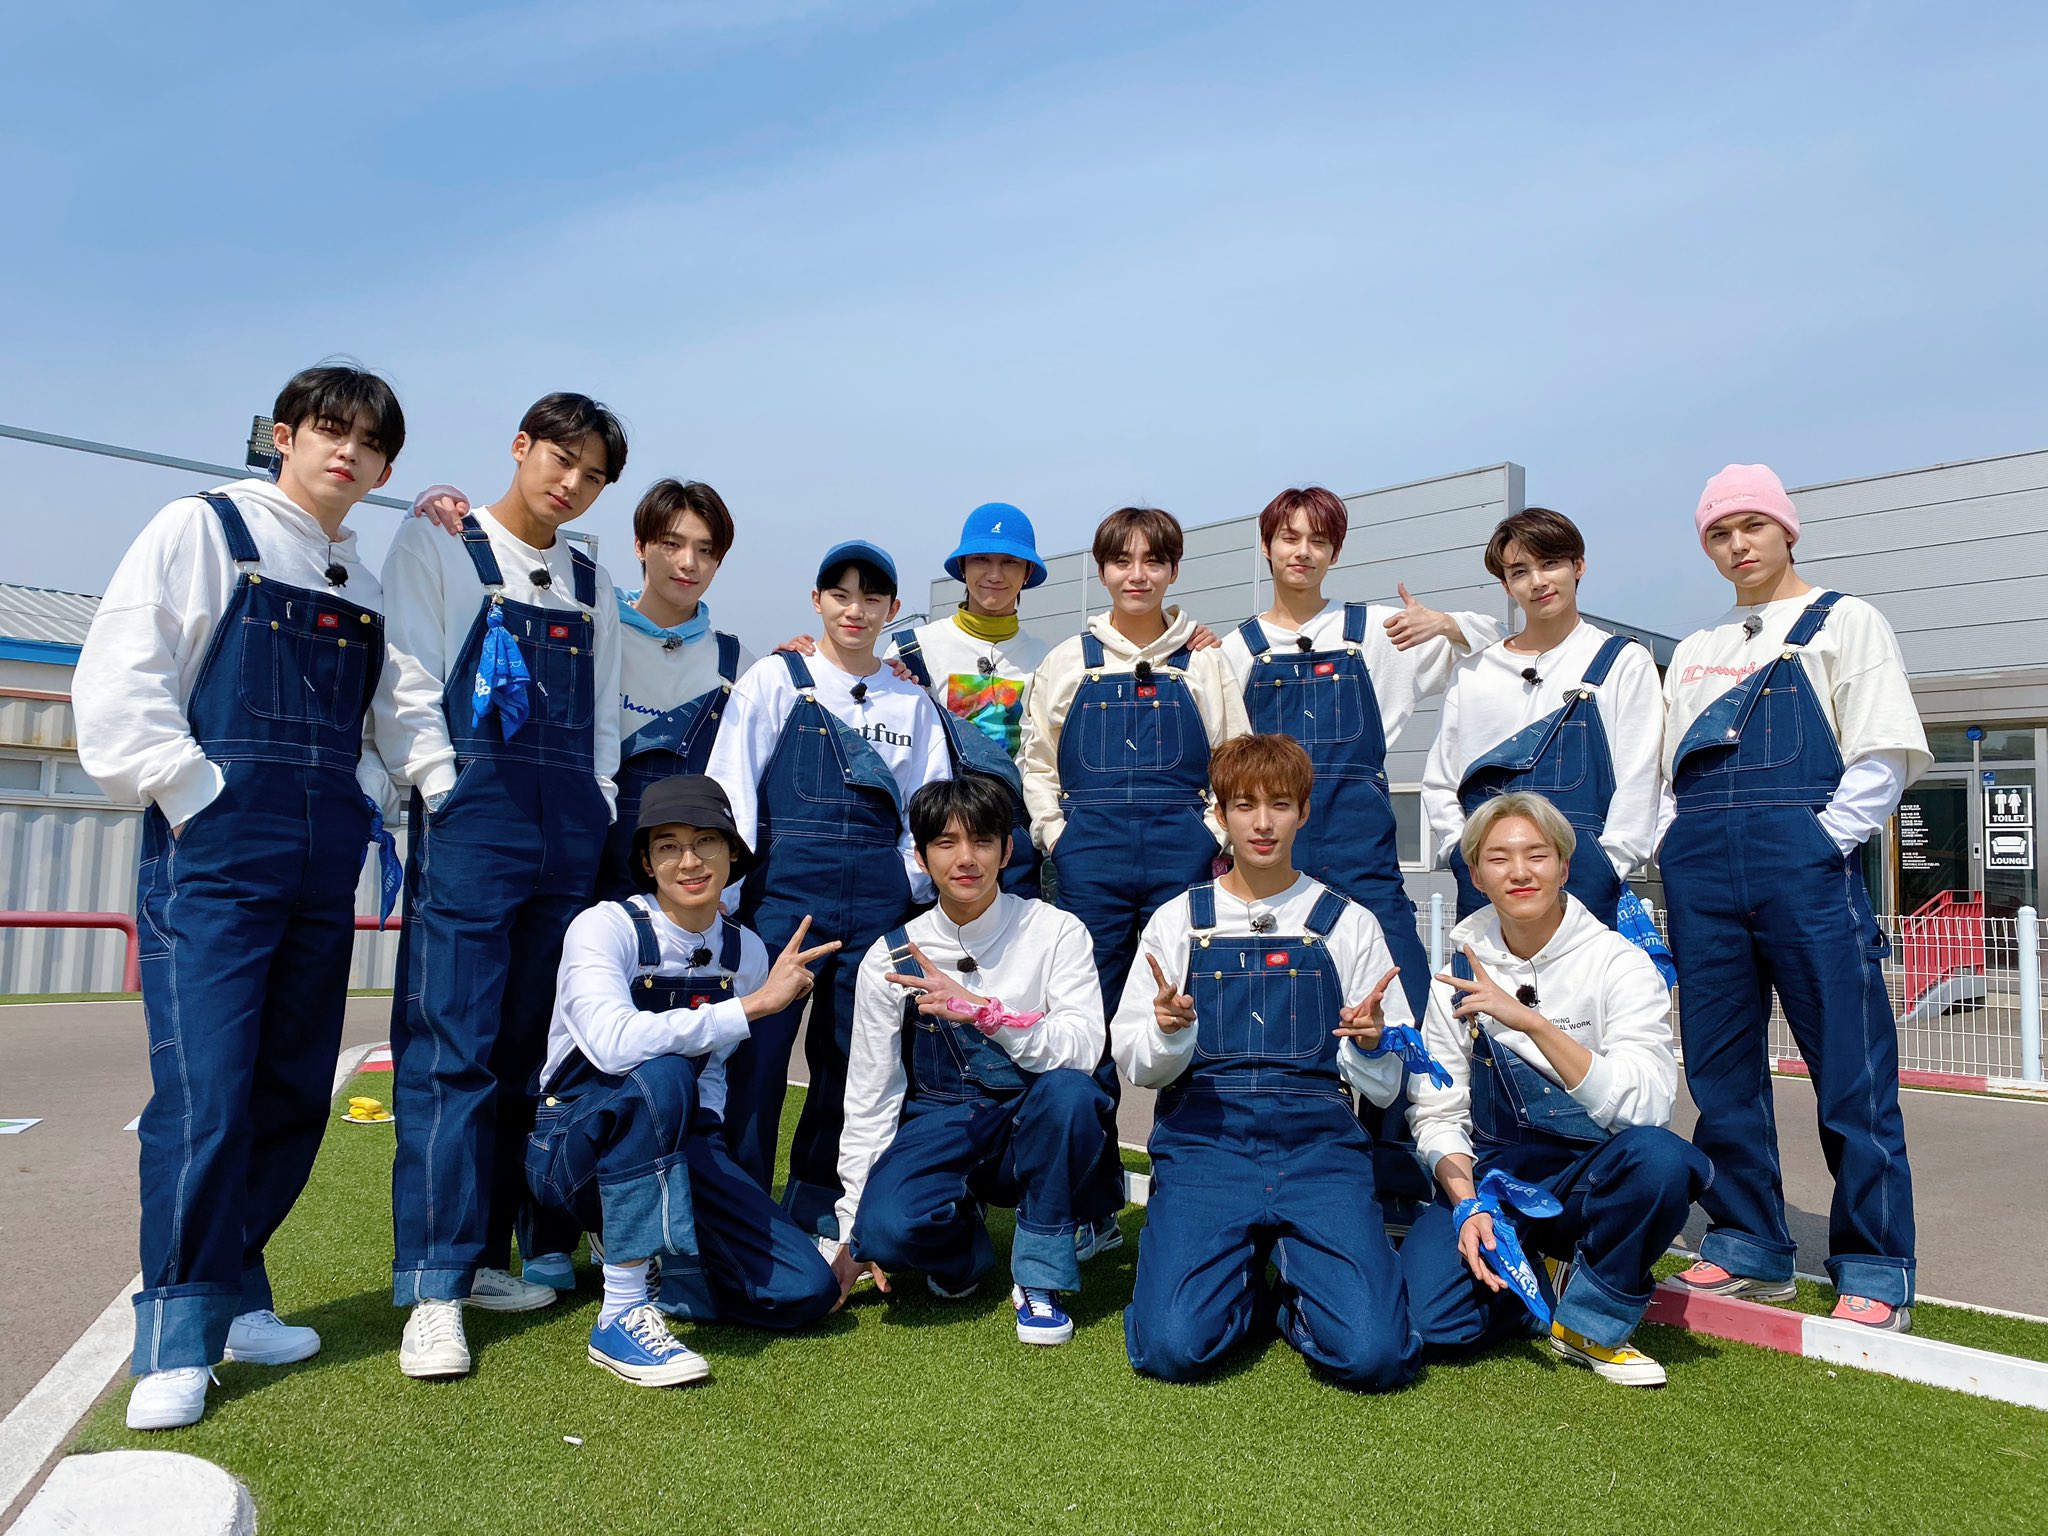 SEVENTEEN wraps up promotion for 'Left & Right' with massive success